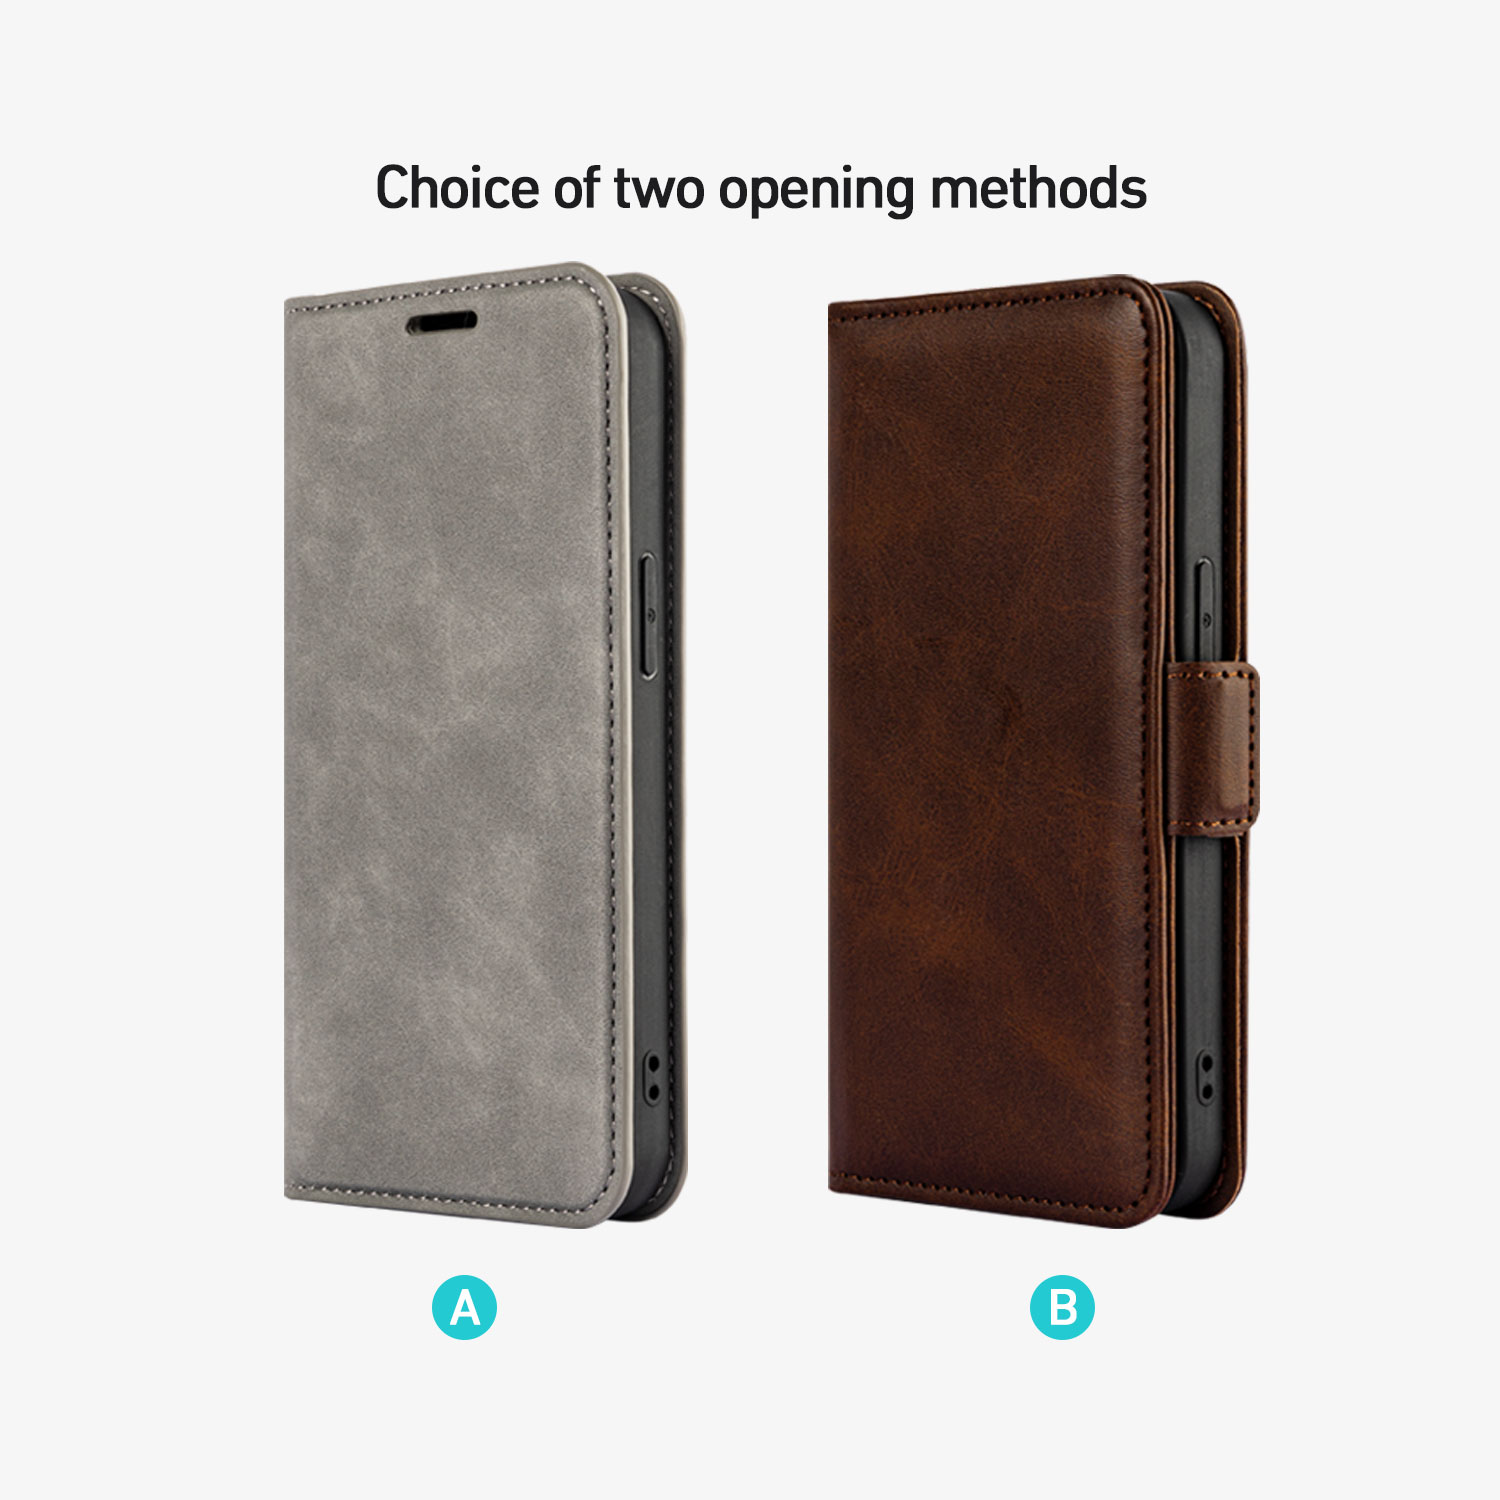 PU leather case for iPhone